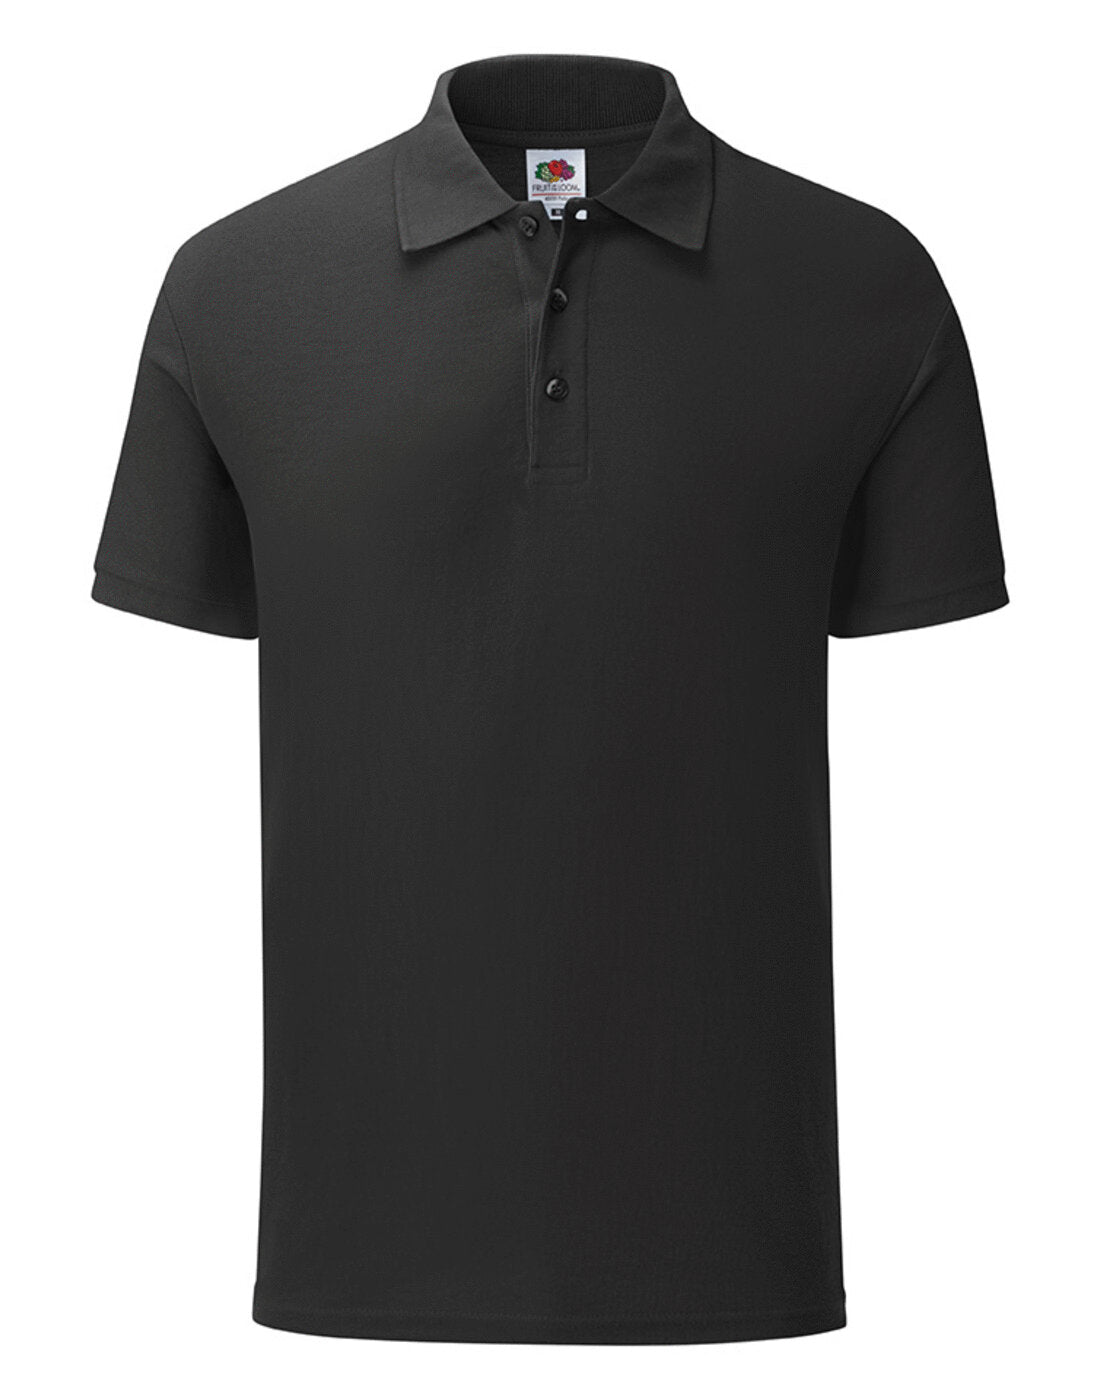 Fruit of the Loom 65/35 Tailored Fit Polo - Black